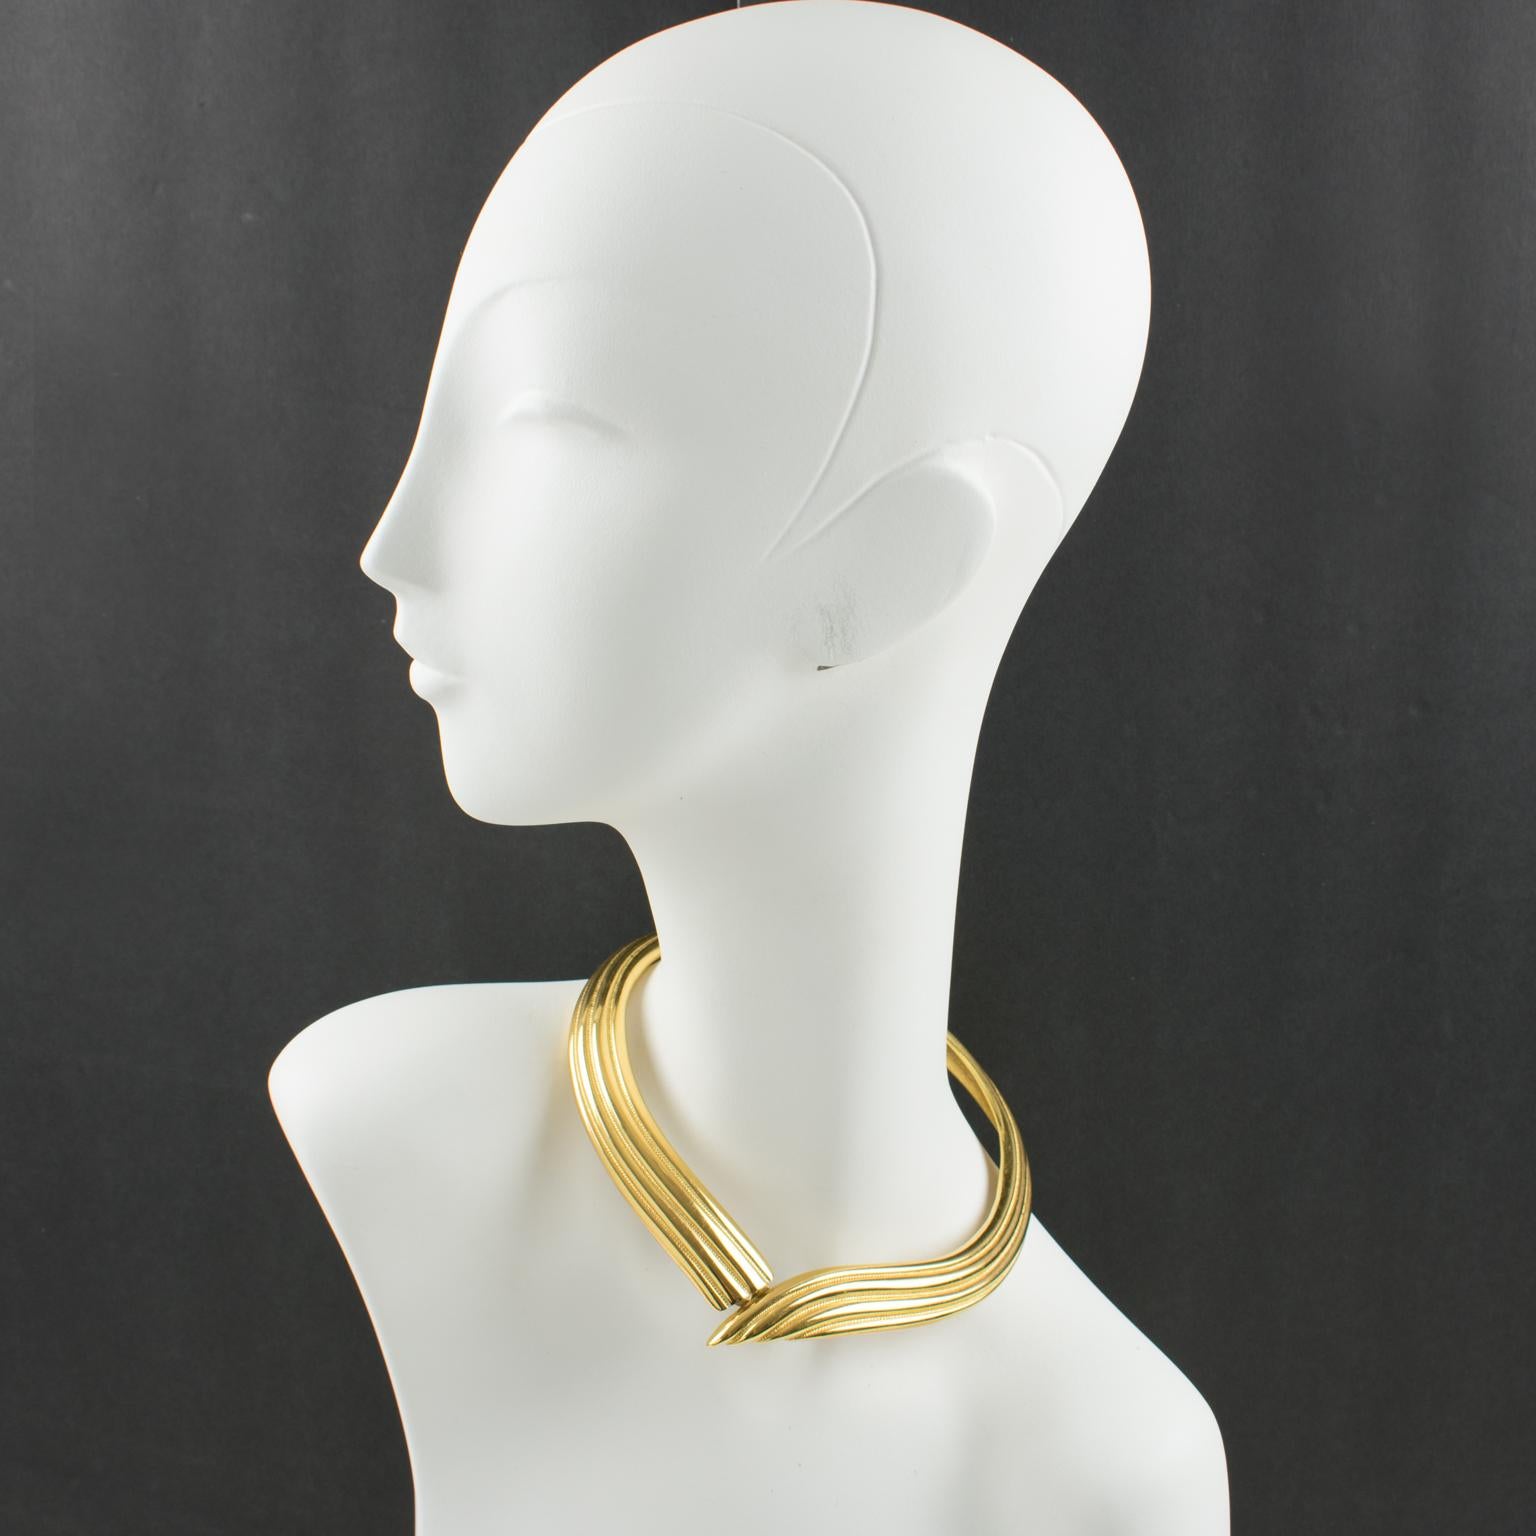 Stunning Yves Saint Laurent Paris collar necklace. Featuring gilt metal articulated rigid neckband with metal all textured. Modernist design with a hidden fastening system. Signed underside with 